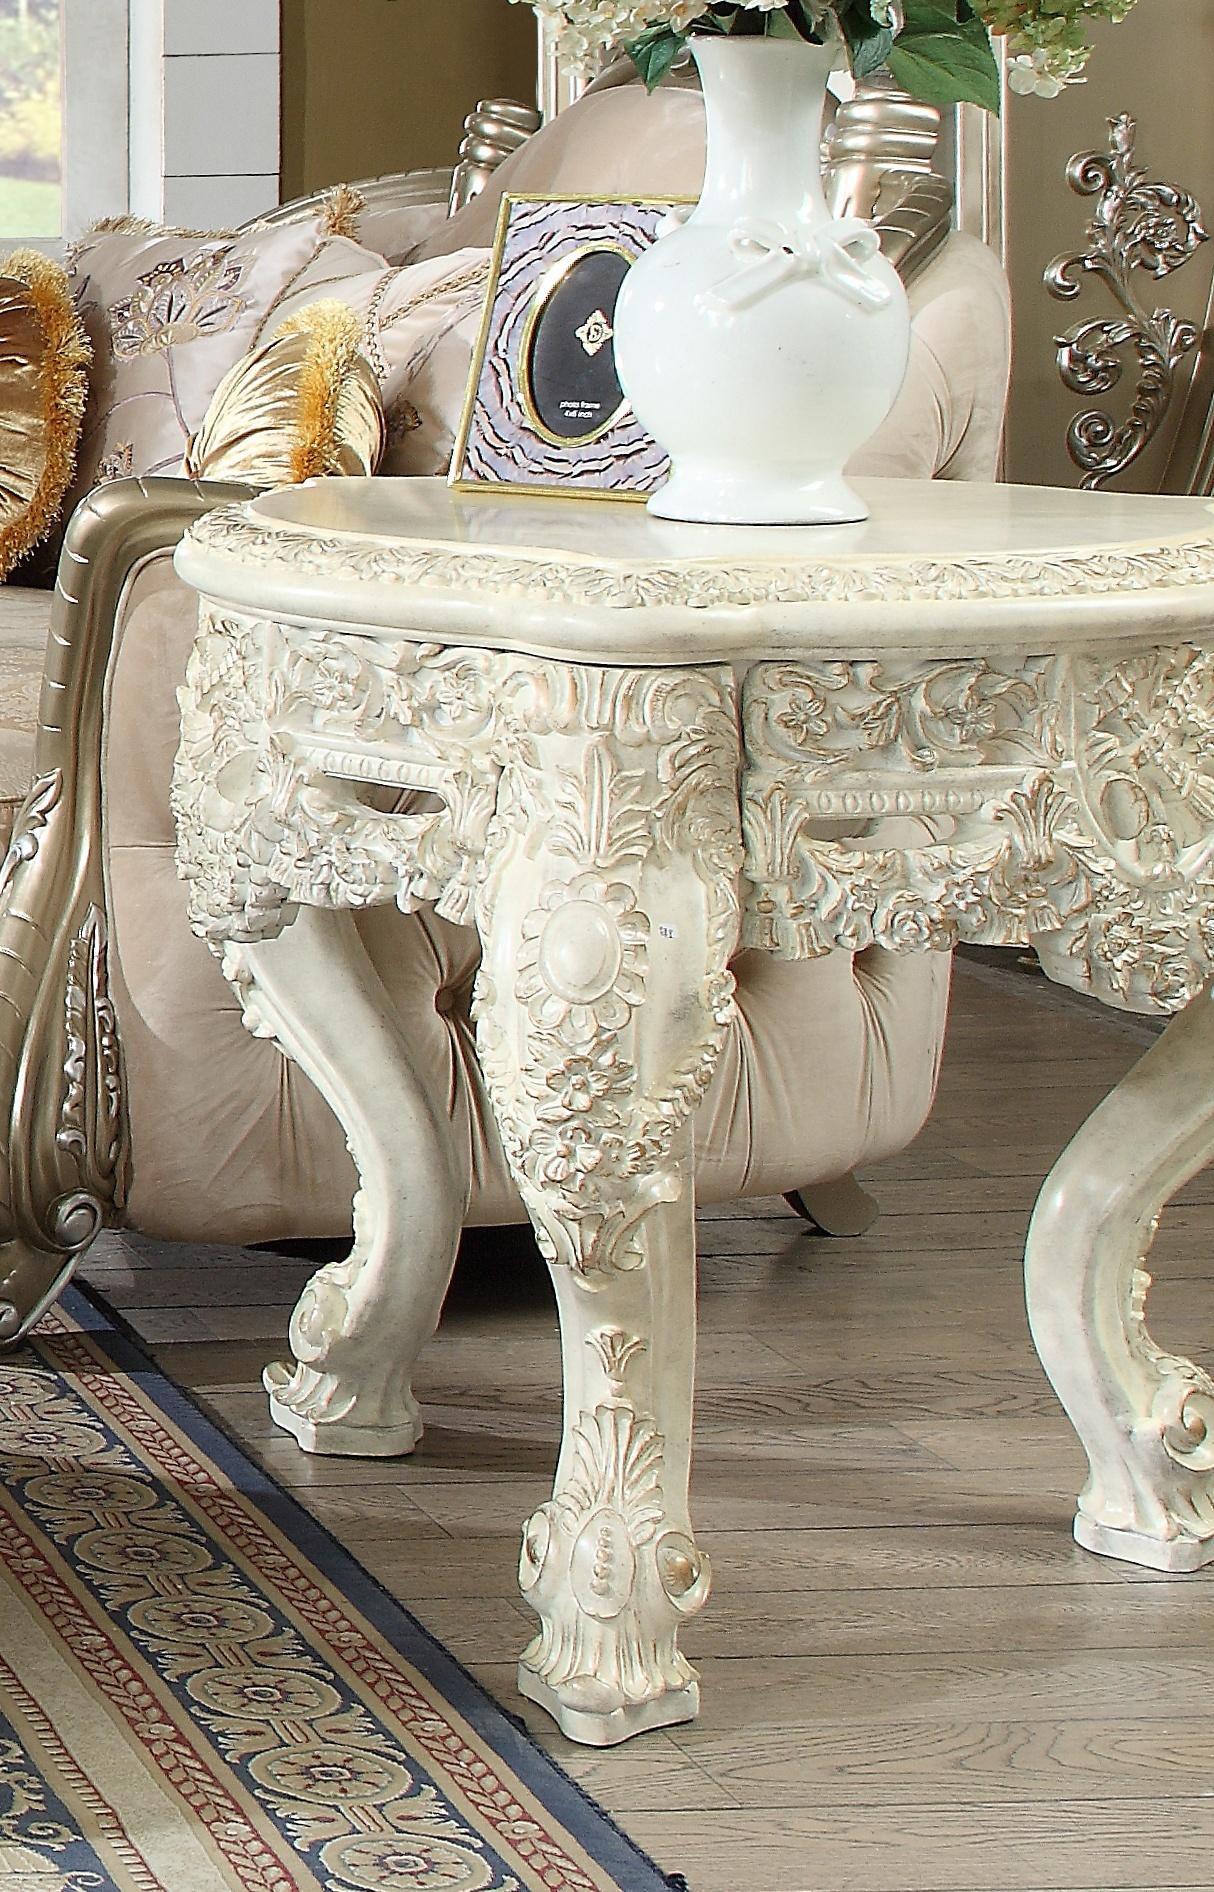 

    
Plantation Cove White End Tables 2Pcs Carved Wood Traditional Homey Design HD-8030
